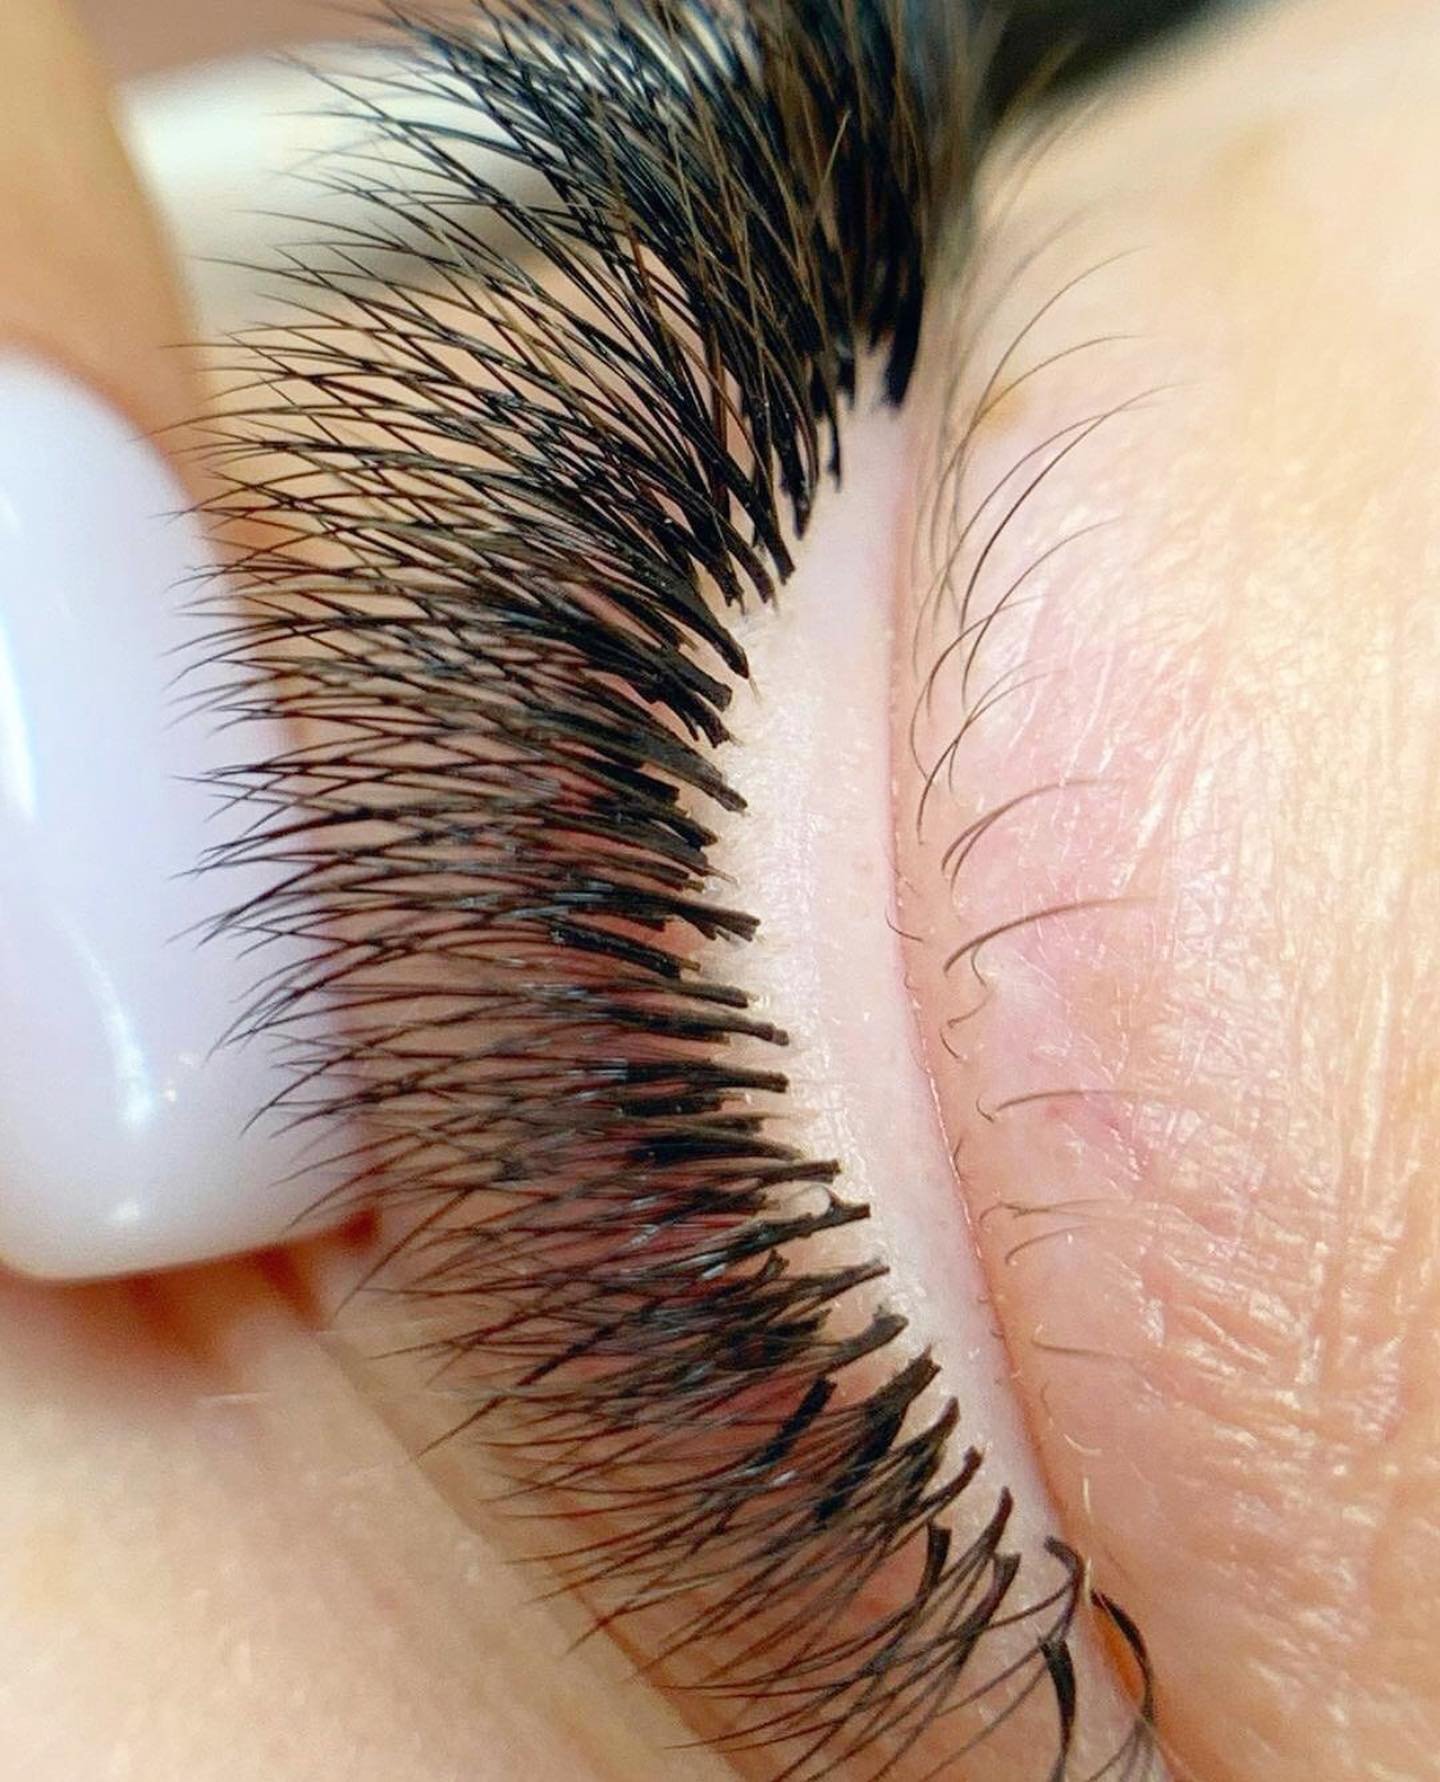 Are Lash Extensions Bad?